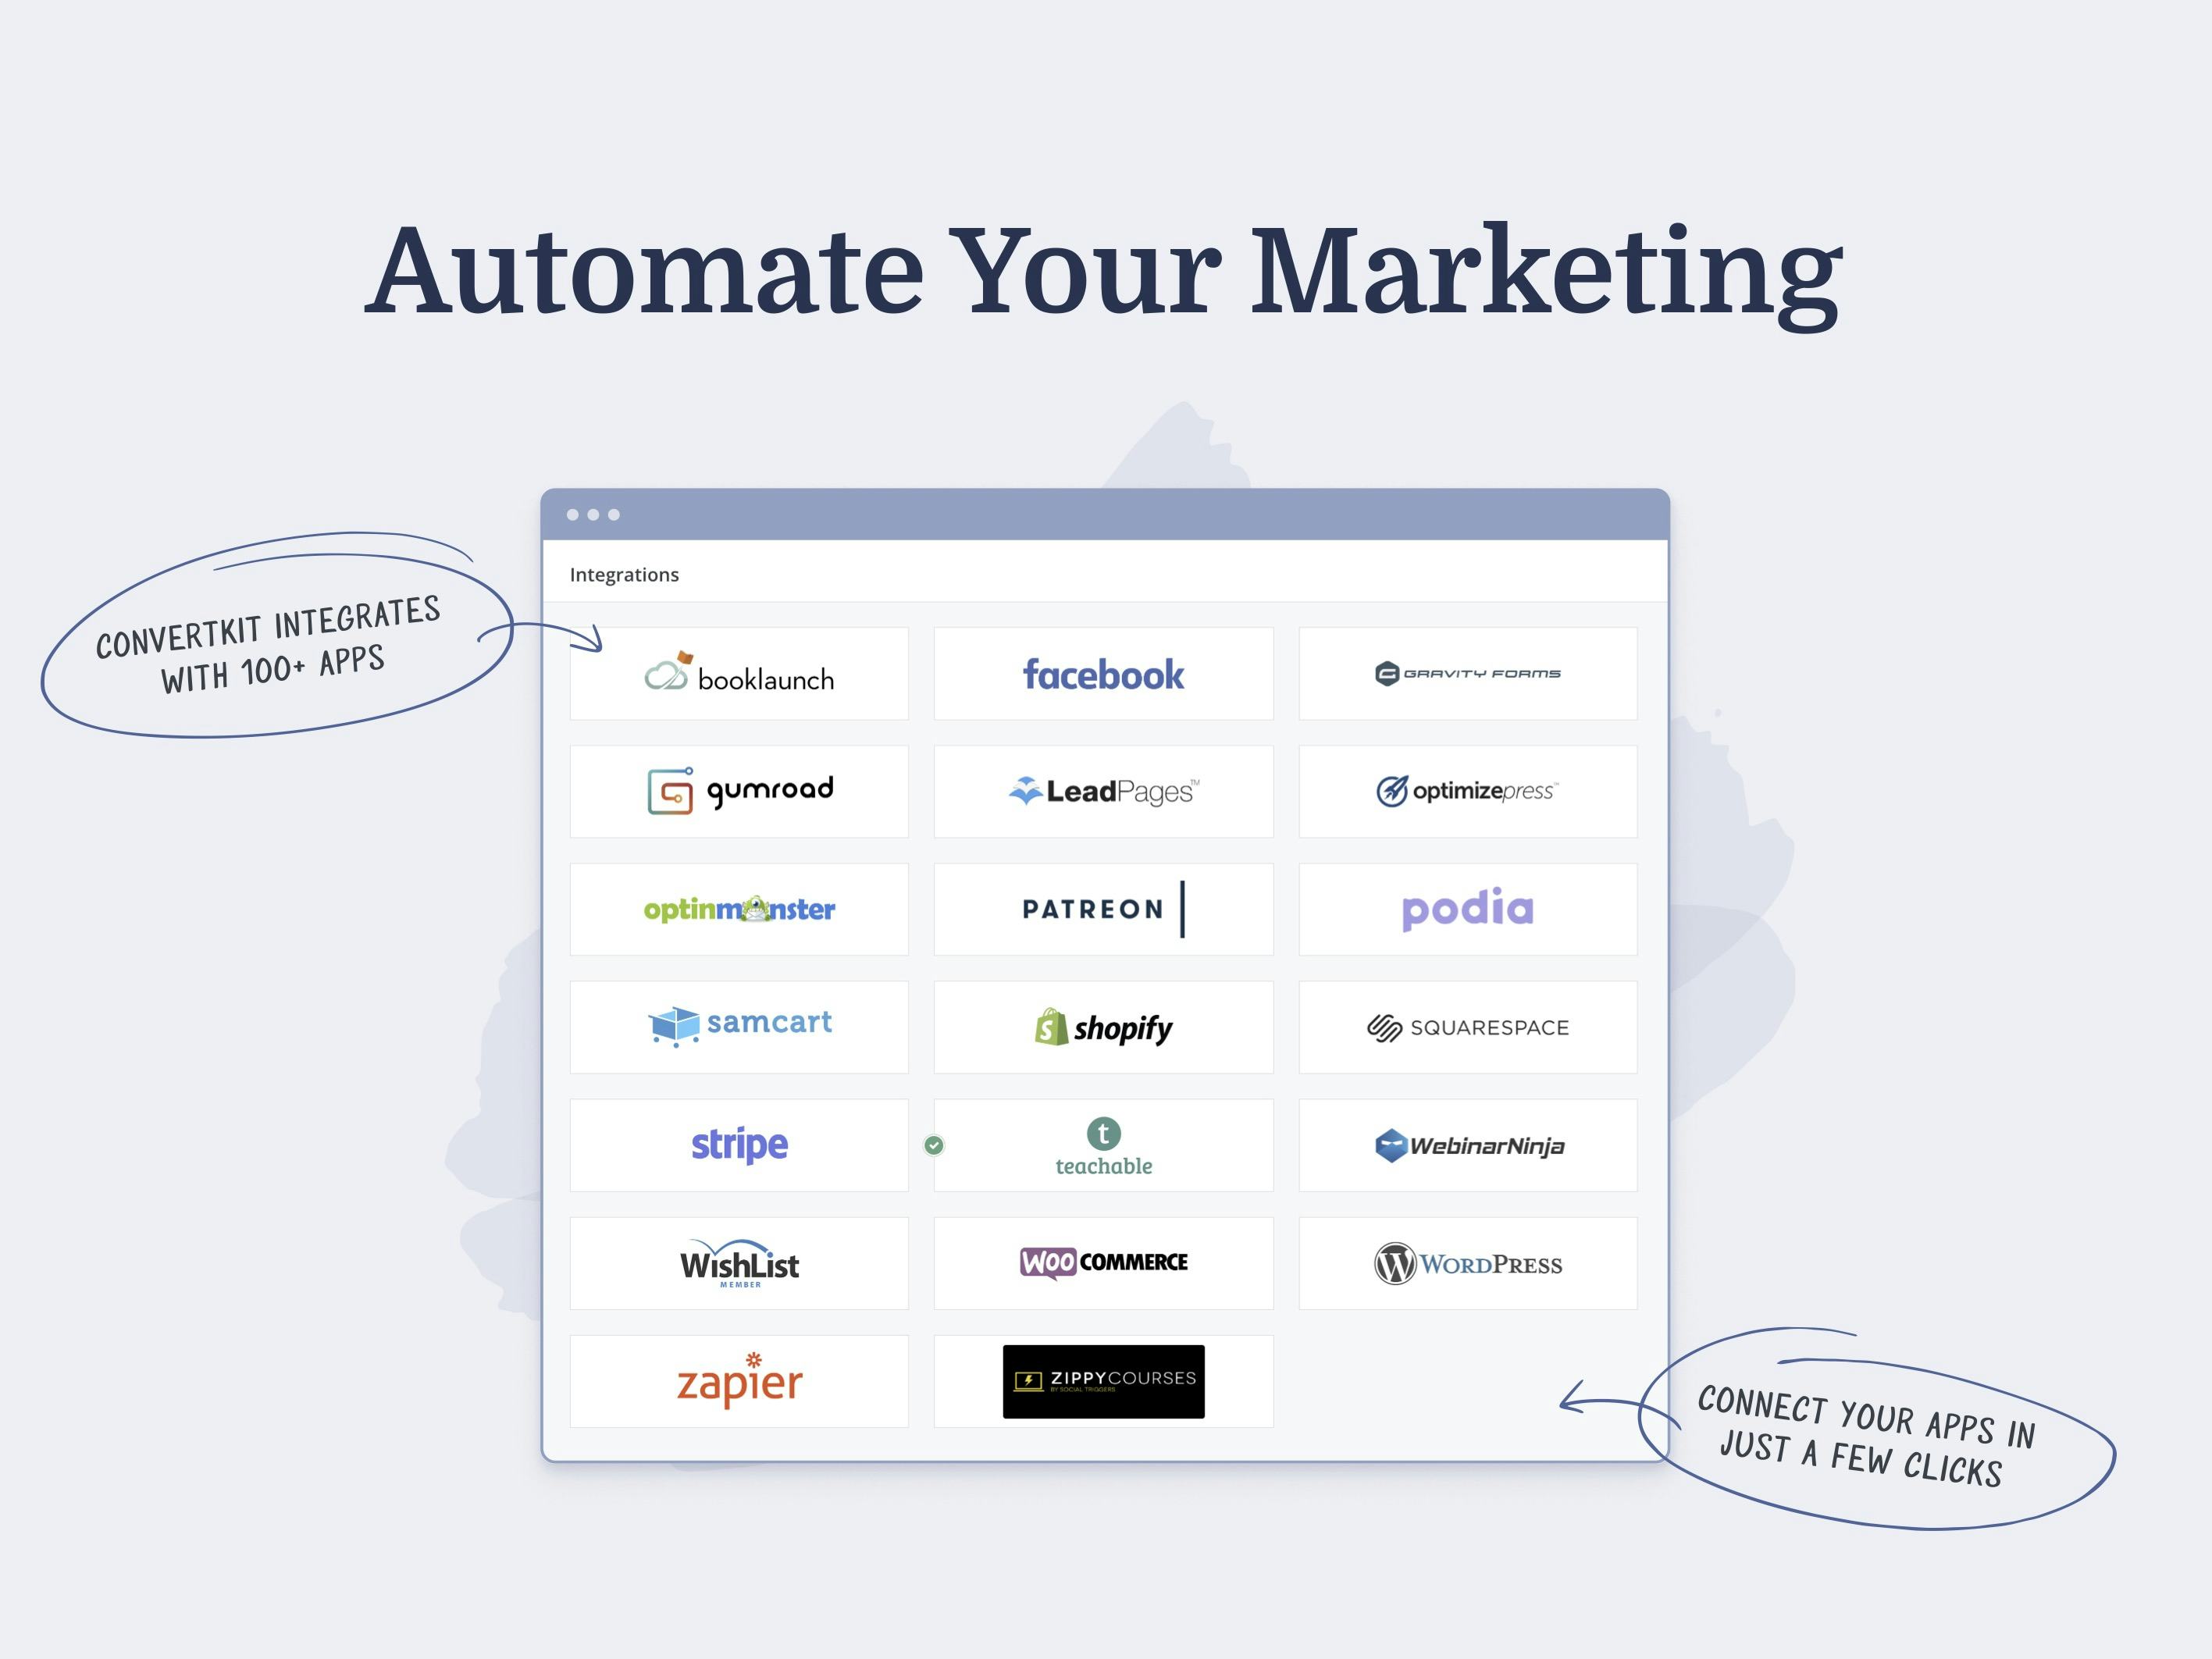 ConvertKit Software - Integrations with 100+ Apps